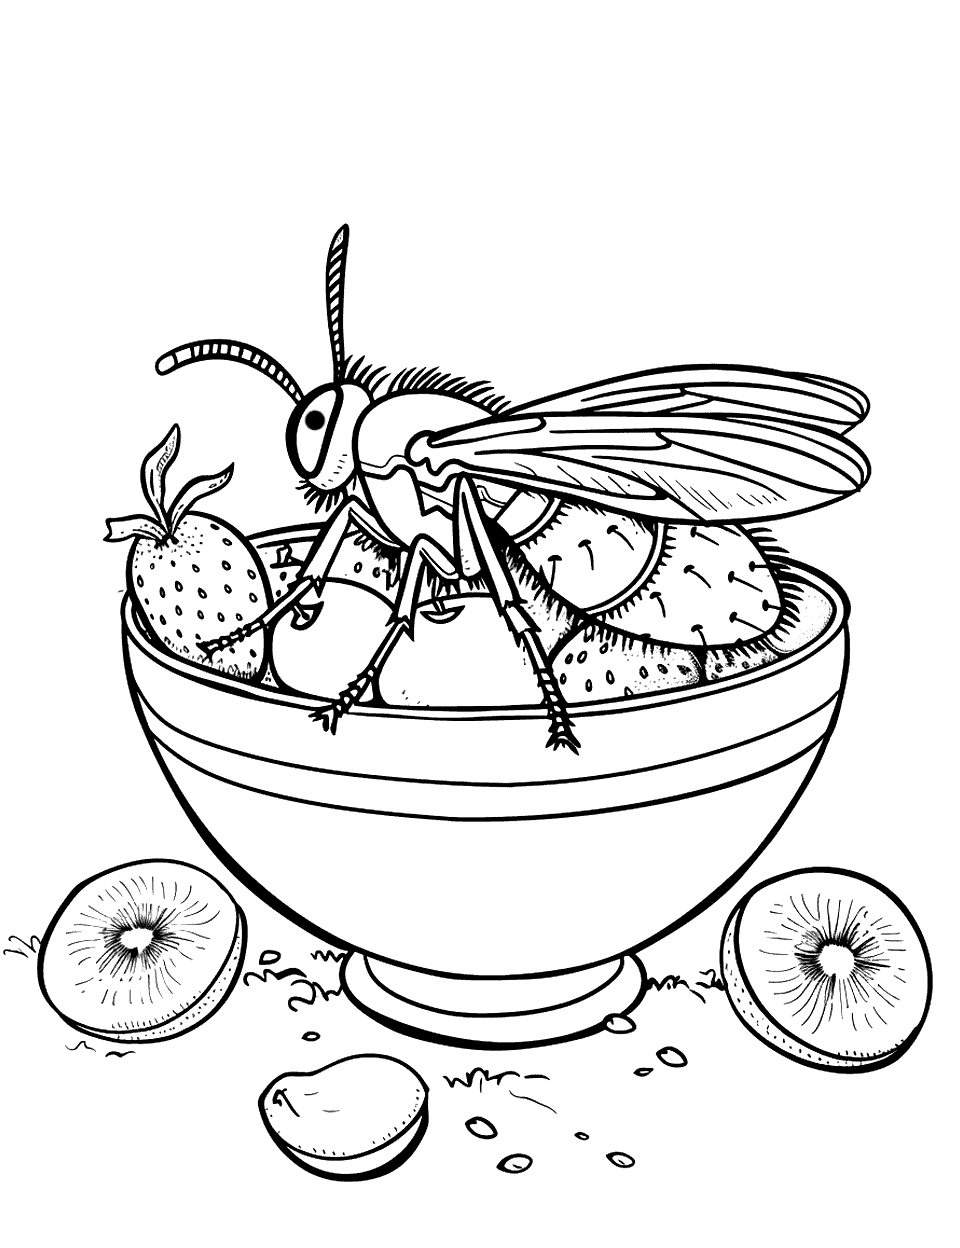 Big Fly Buzzing Insect Coloring Page - A big fly buzzing on top of a bowl filled with fruits.